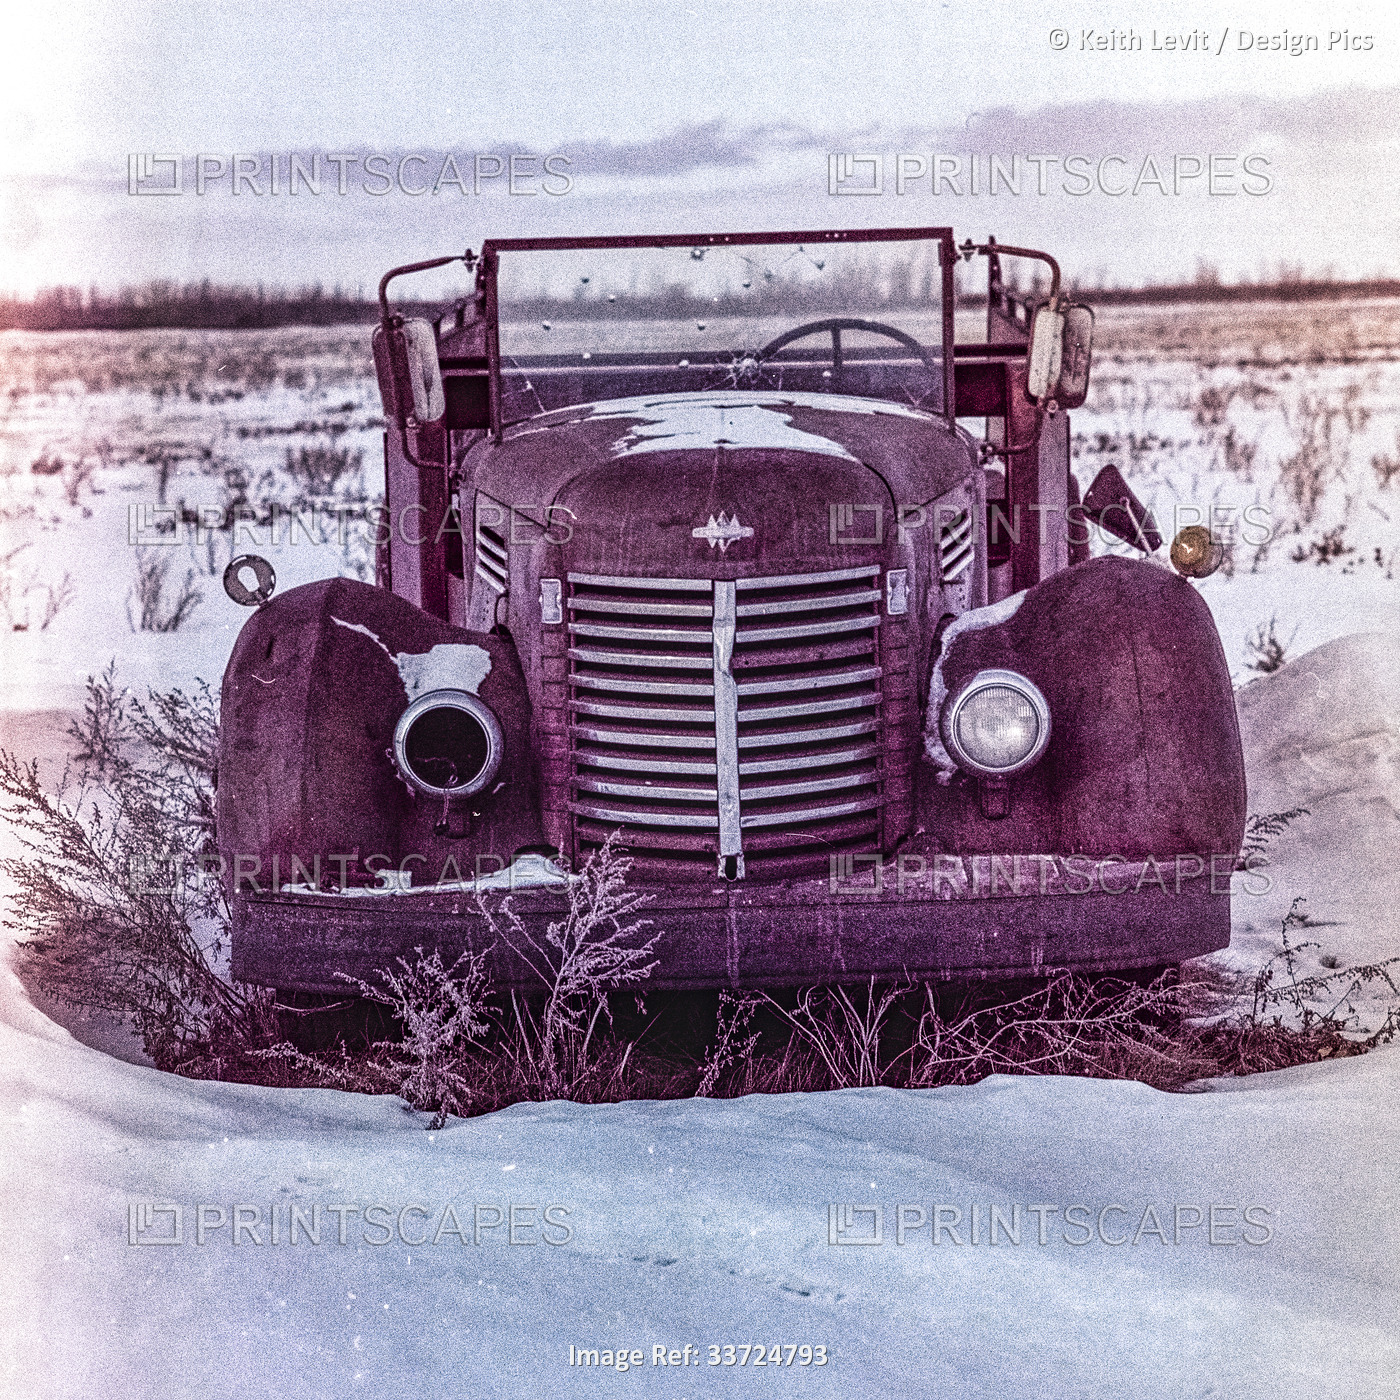 Vintage car abandoned in the countryside in a snowy field; Manitoba, Canada